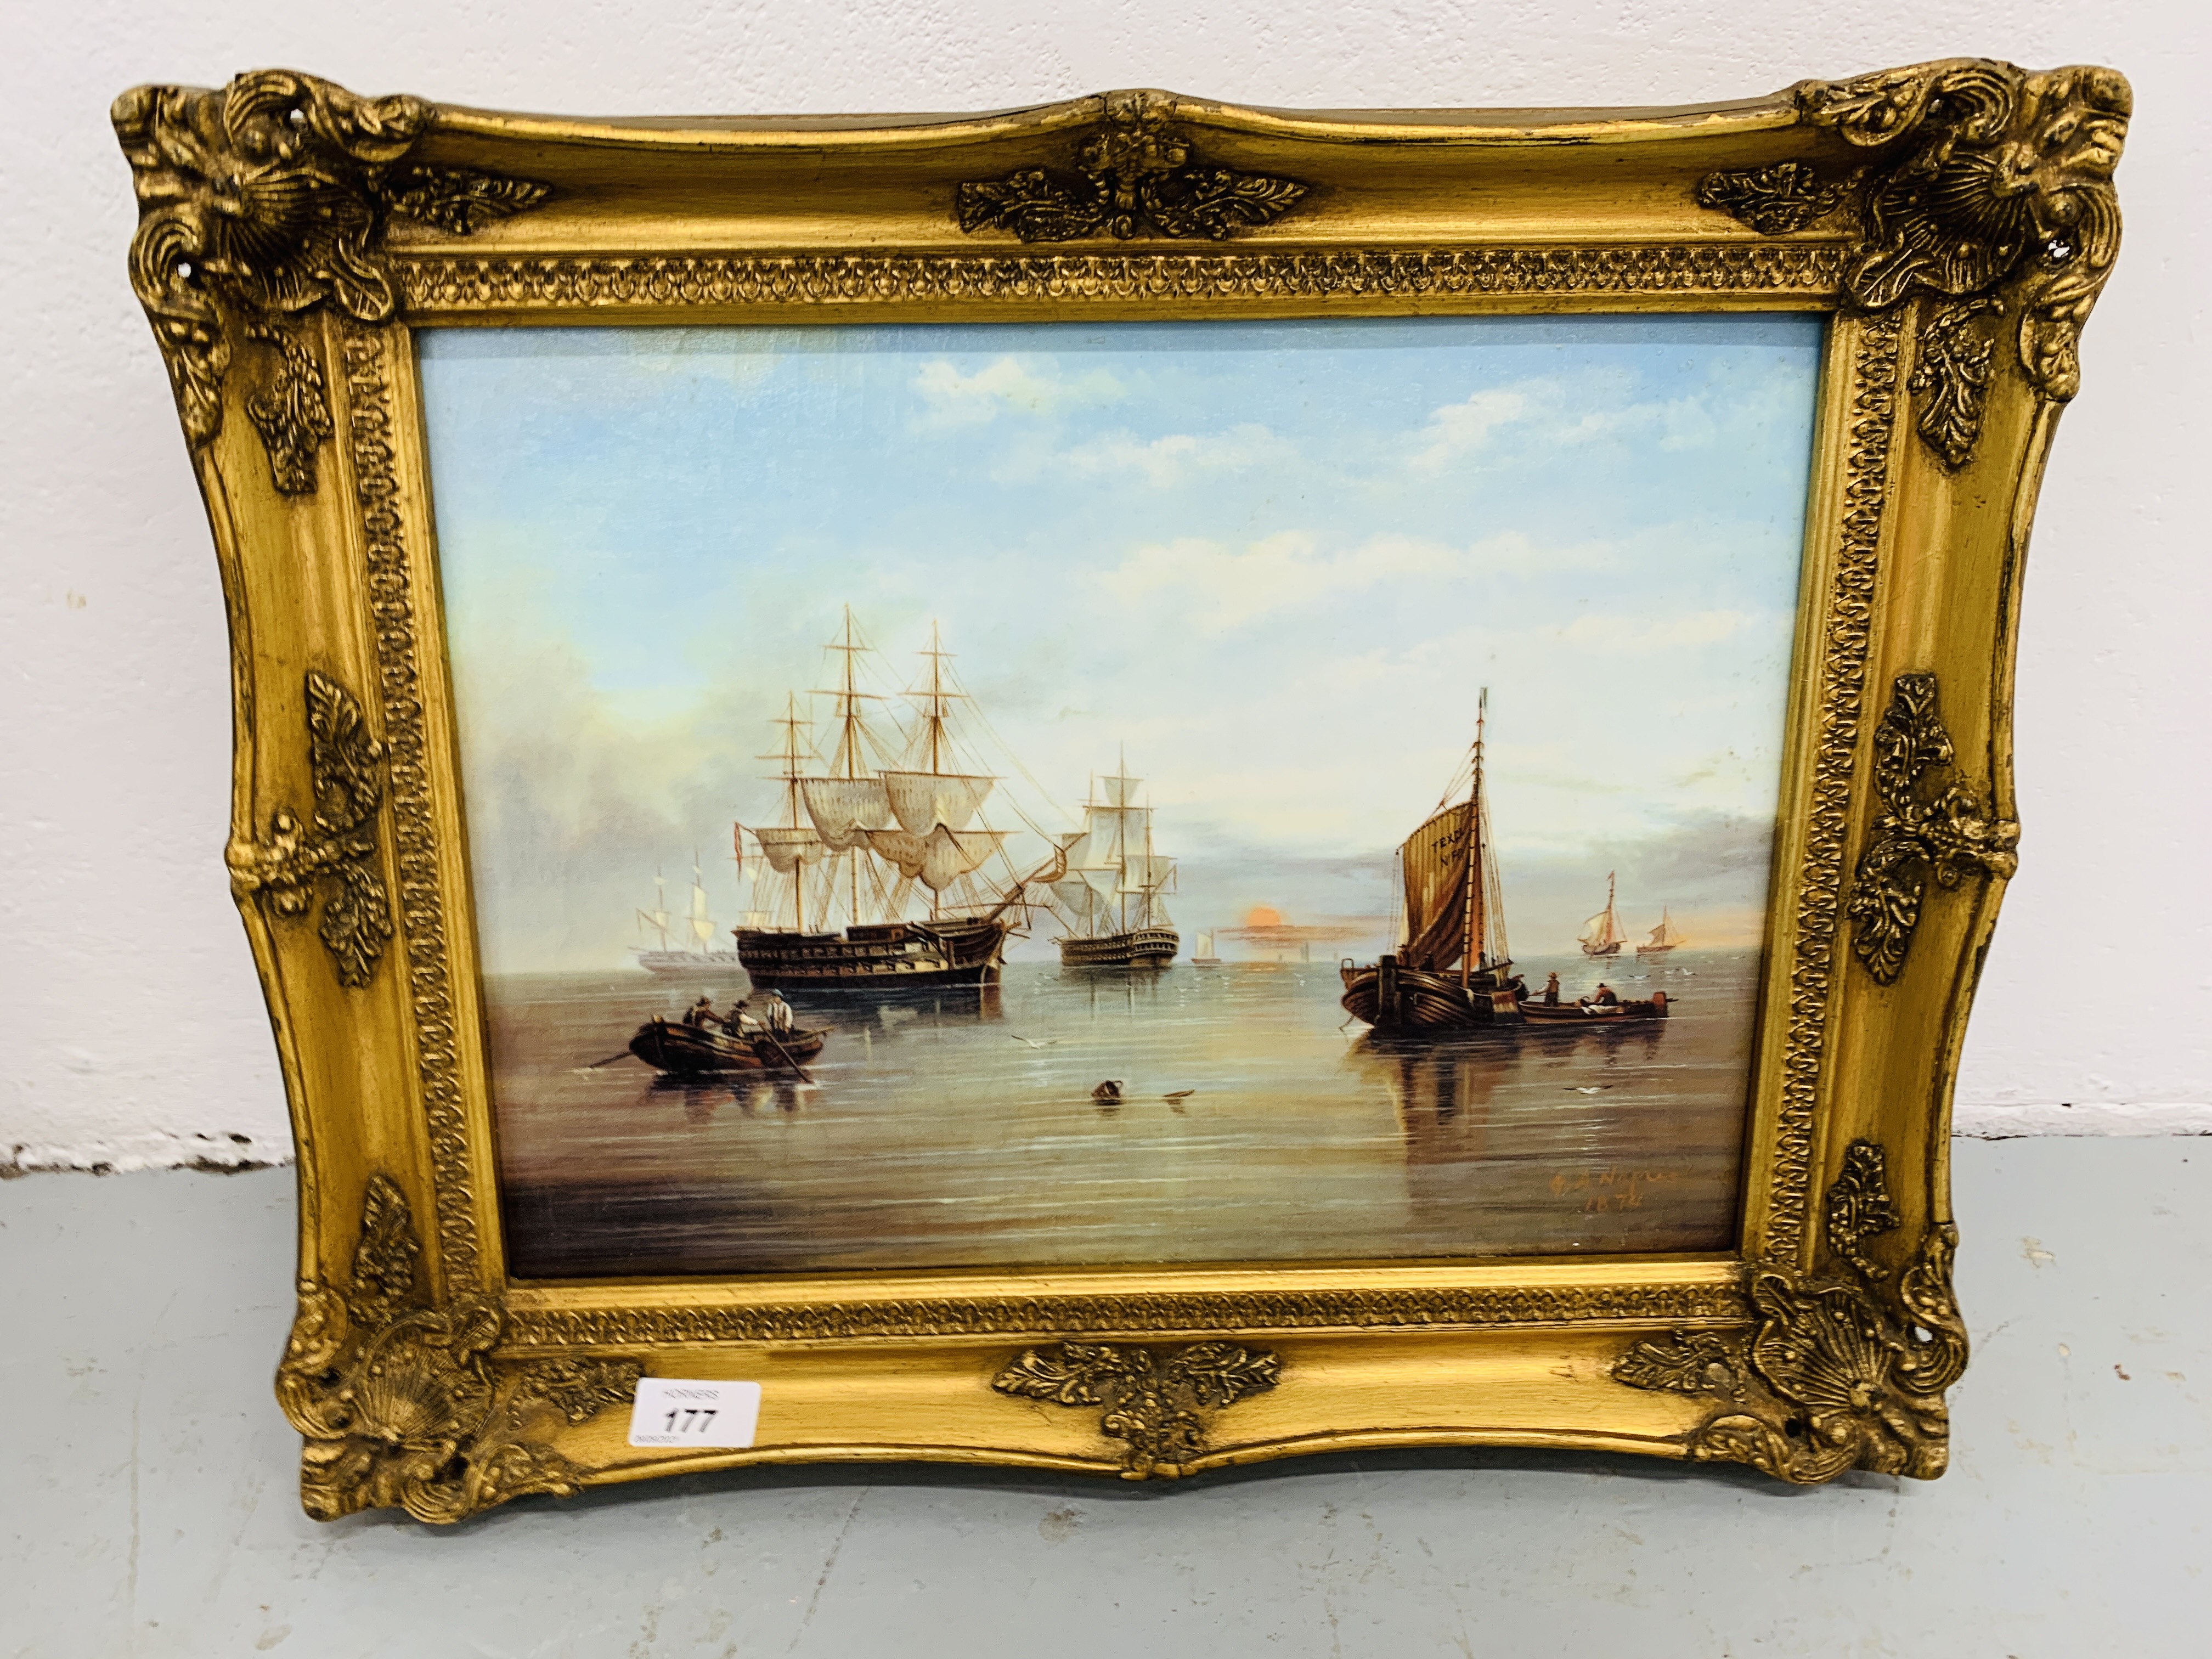 A REPRODUCTION GILT FRAMED PRINT, HARBOUR SCENE WITH GALLEONS H 29, W 39.